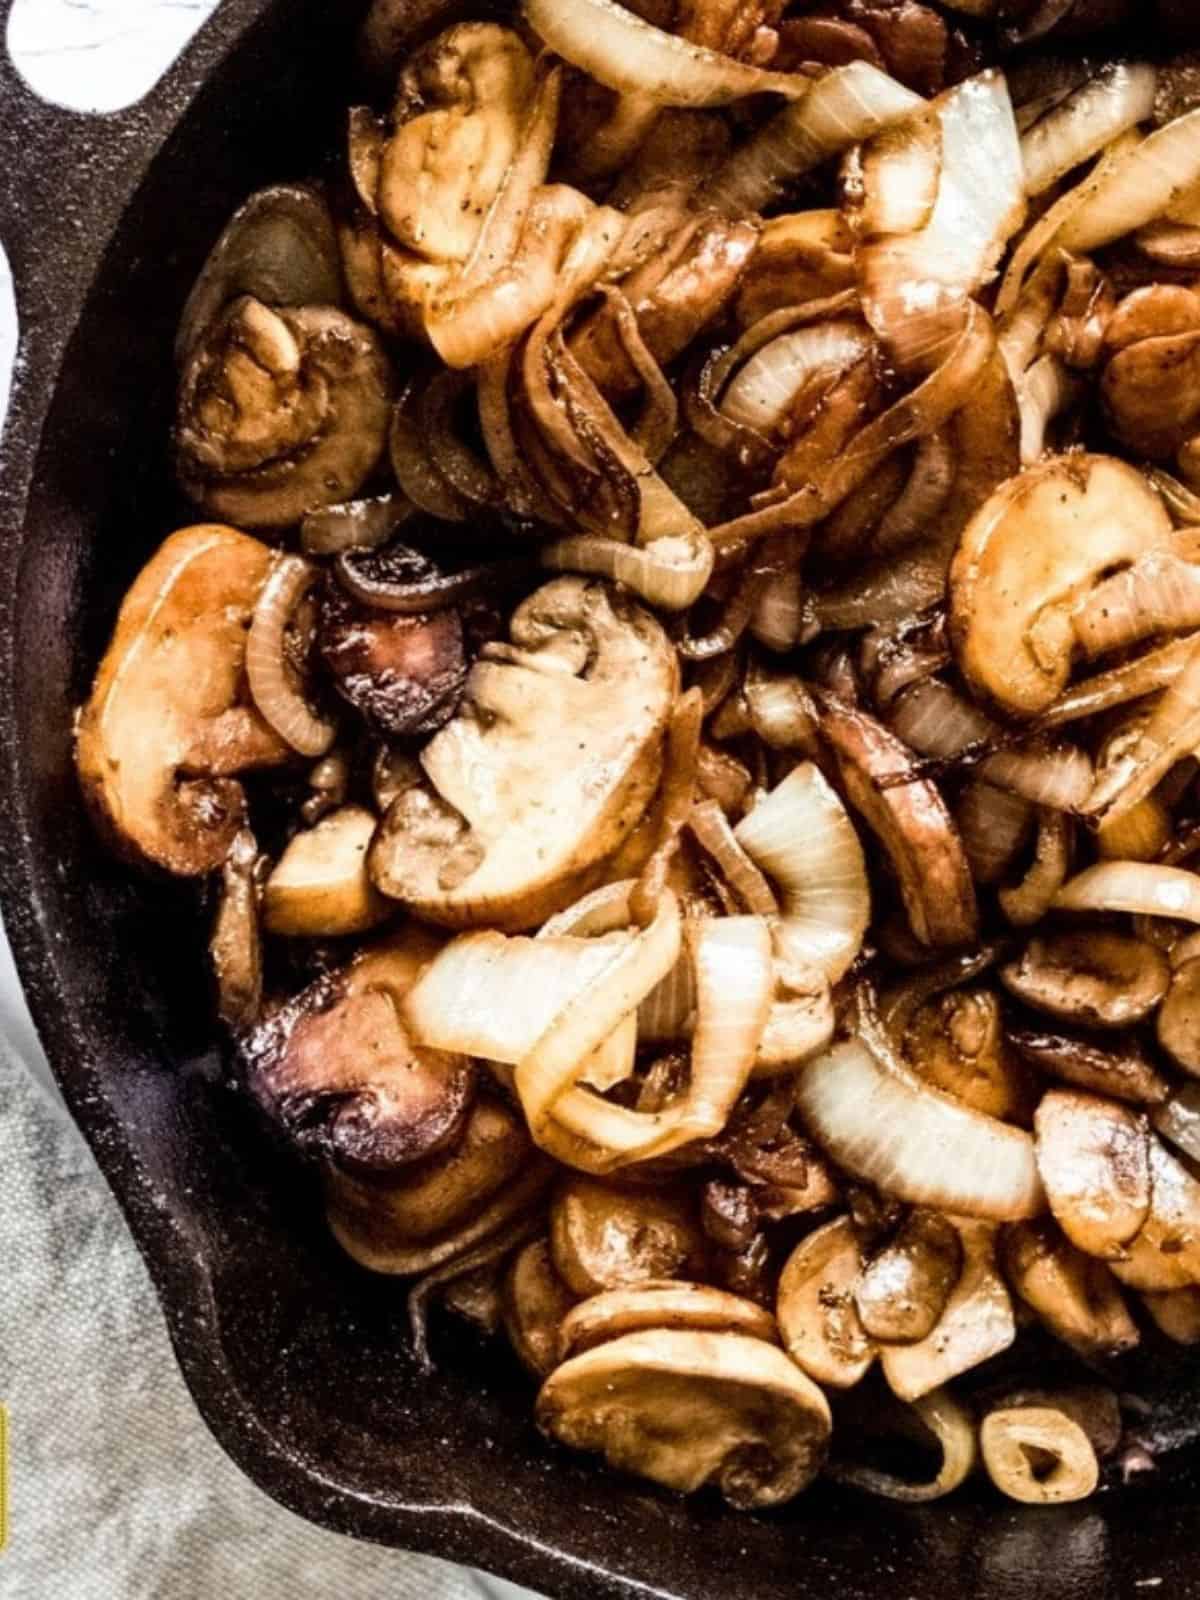 Mushrooms and onions in a skillet cooked down.